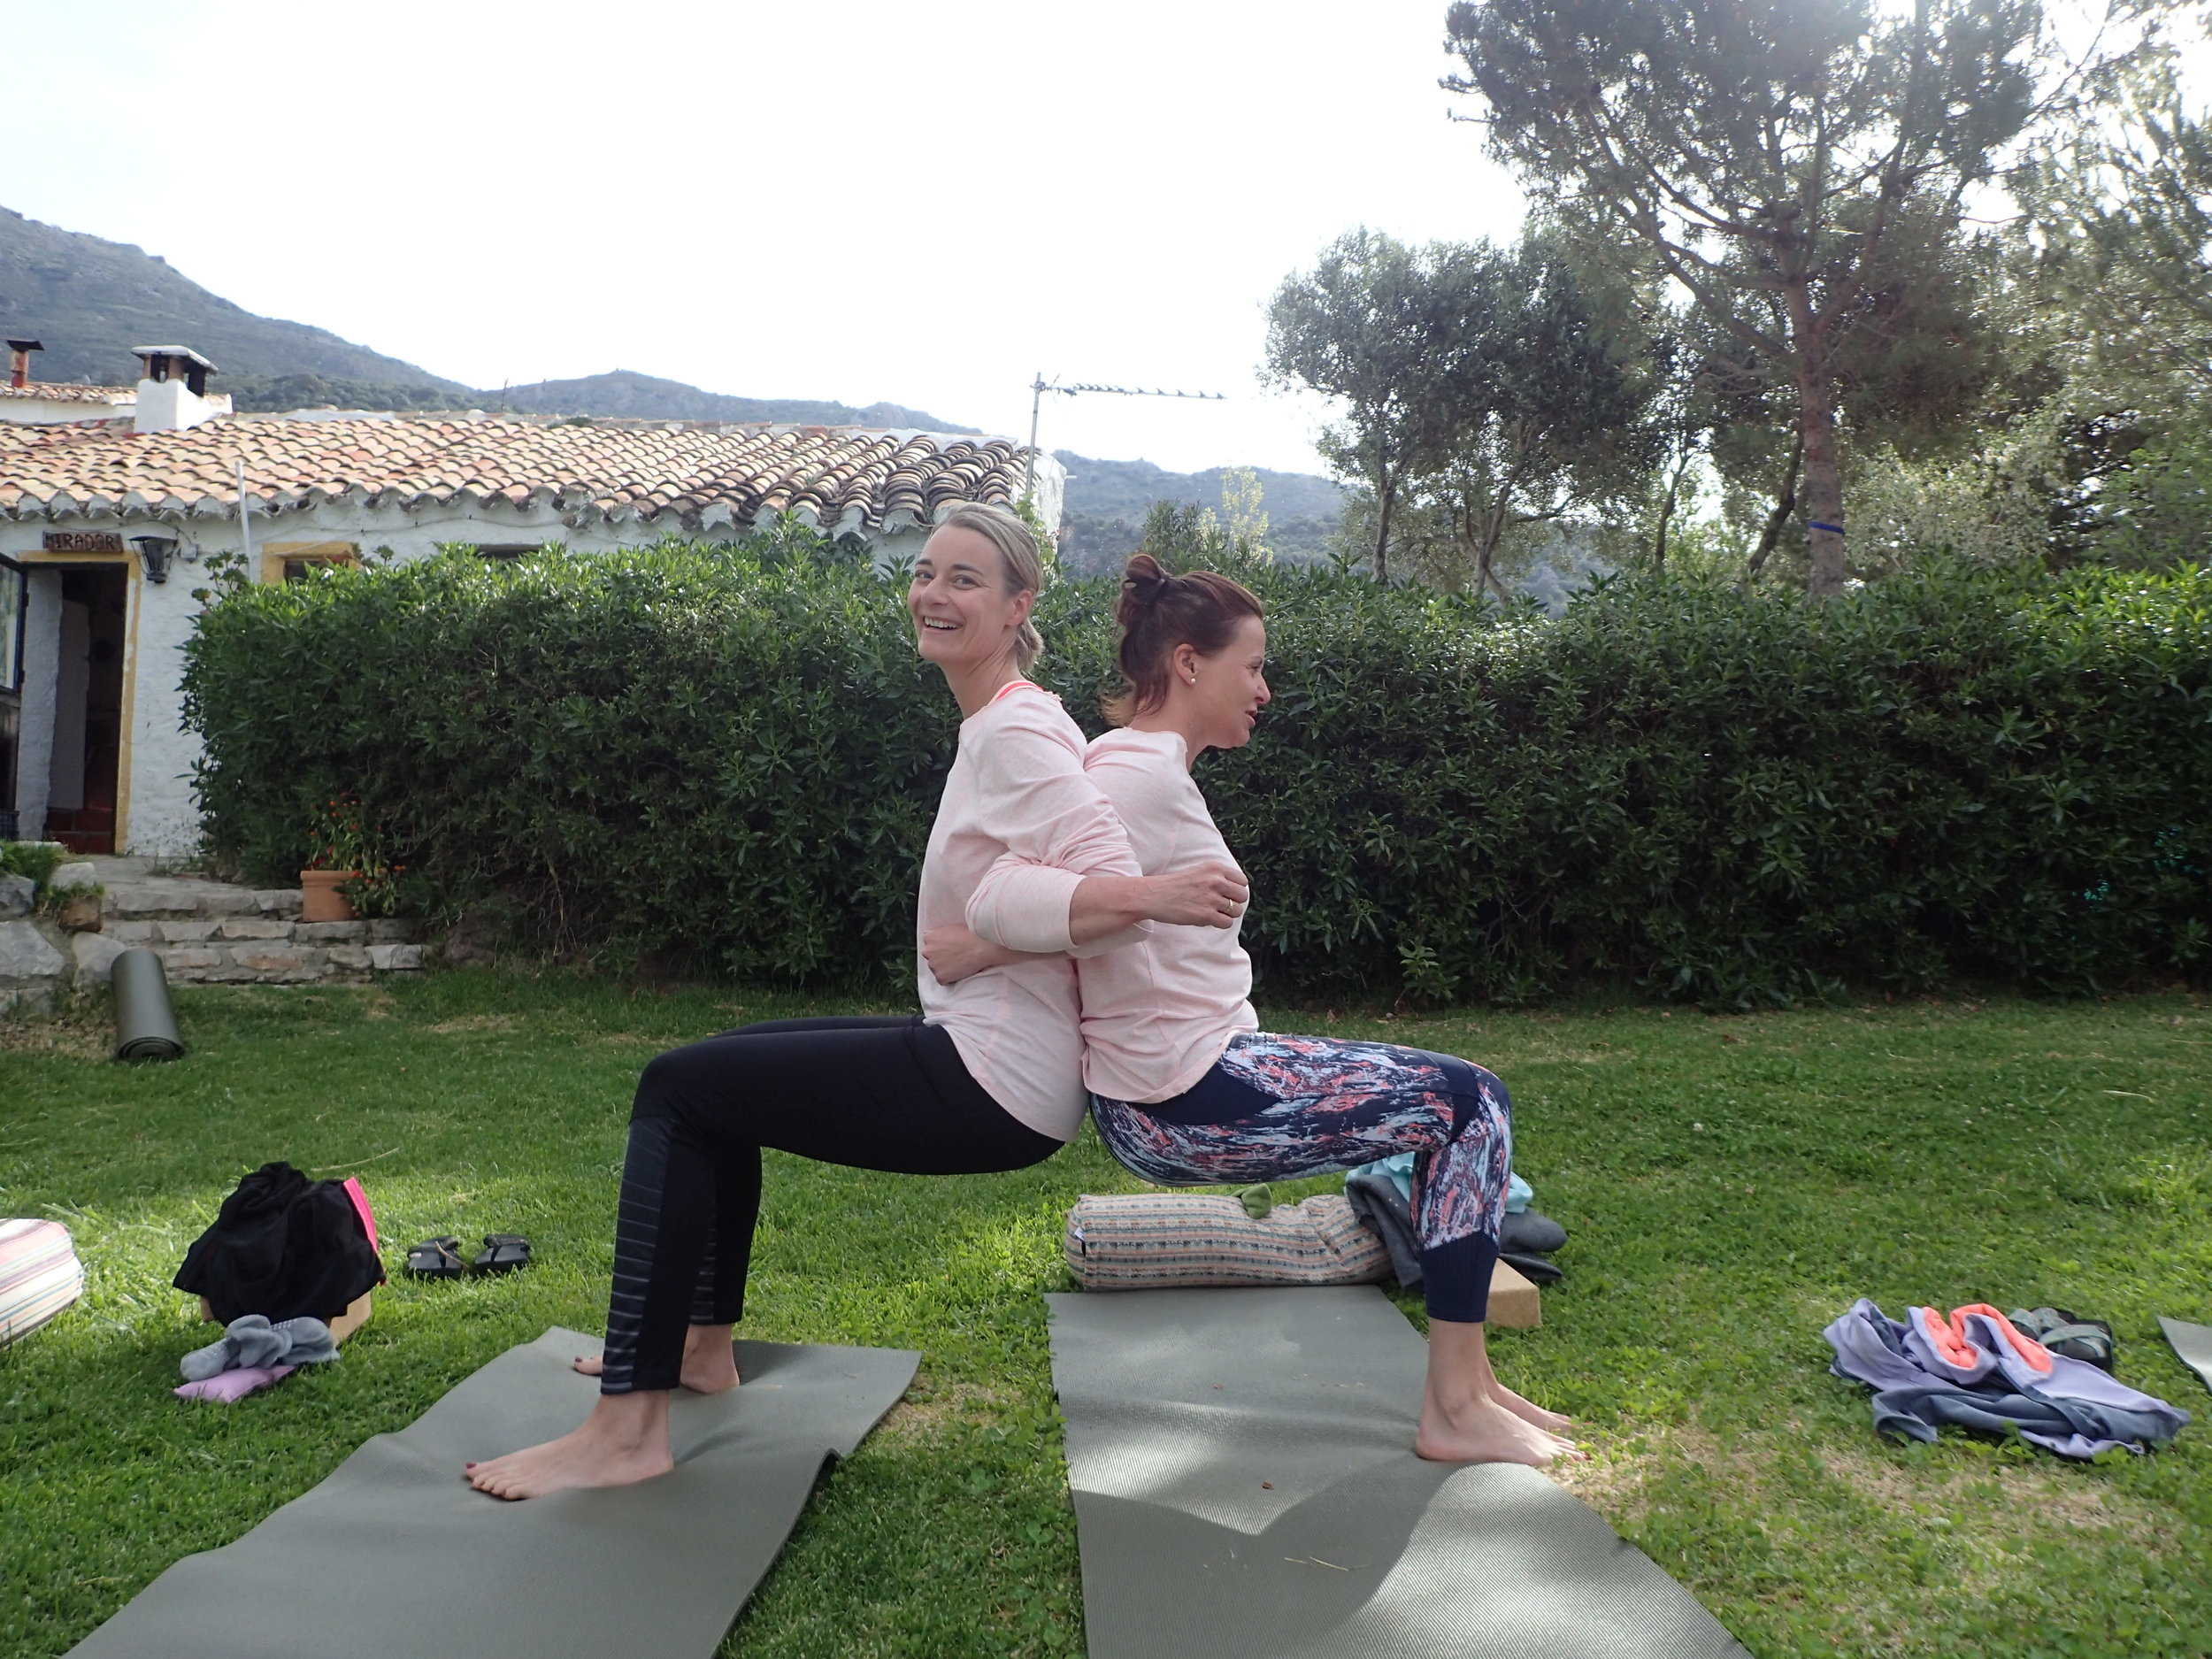 Partner yoga in garden at Yin Yang Yoga retreat in the Malaga mountains in Spain with Jane Bakx Yoga (Copy) (Copy)